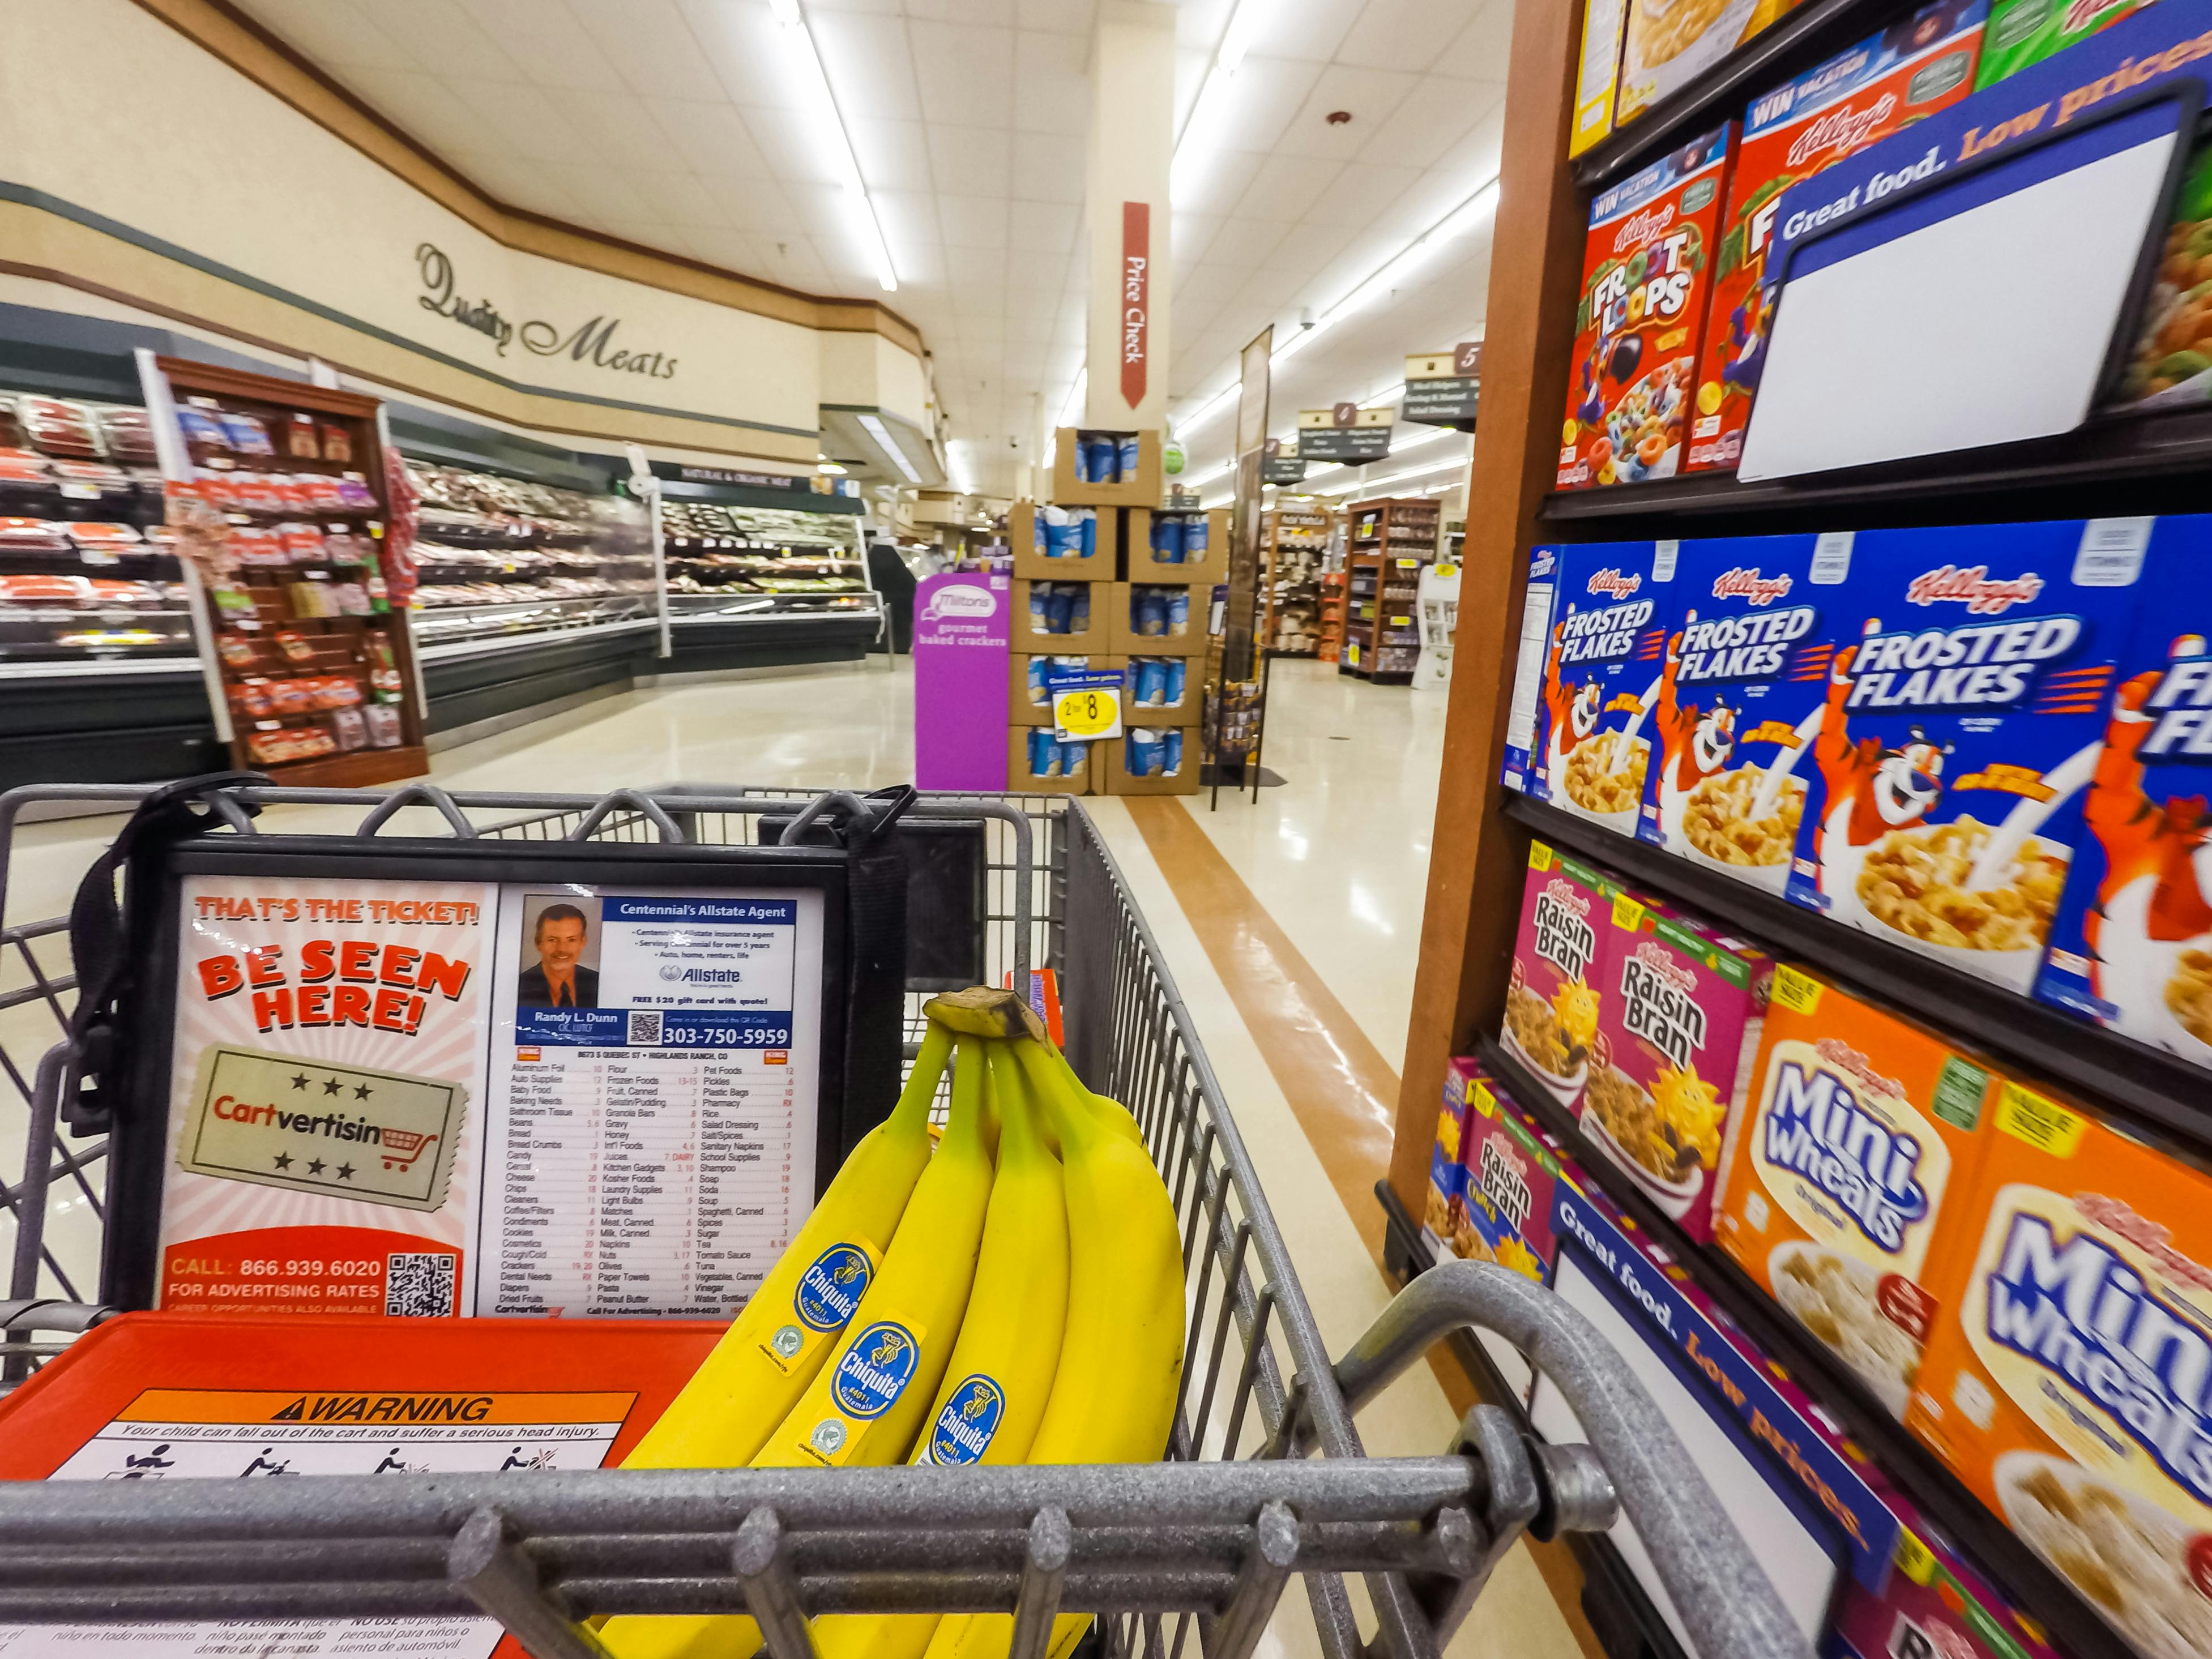 A shopping cart with bananas in the basket, next to a shelf filled with cereal.